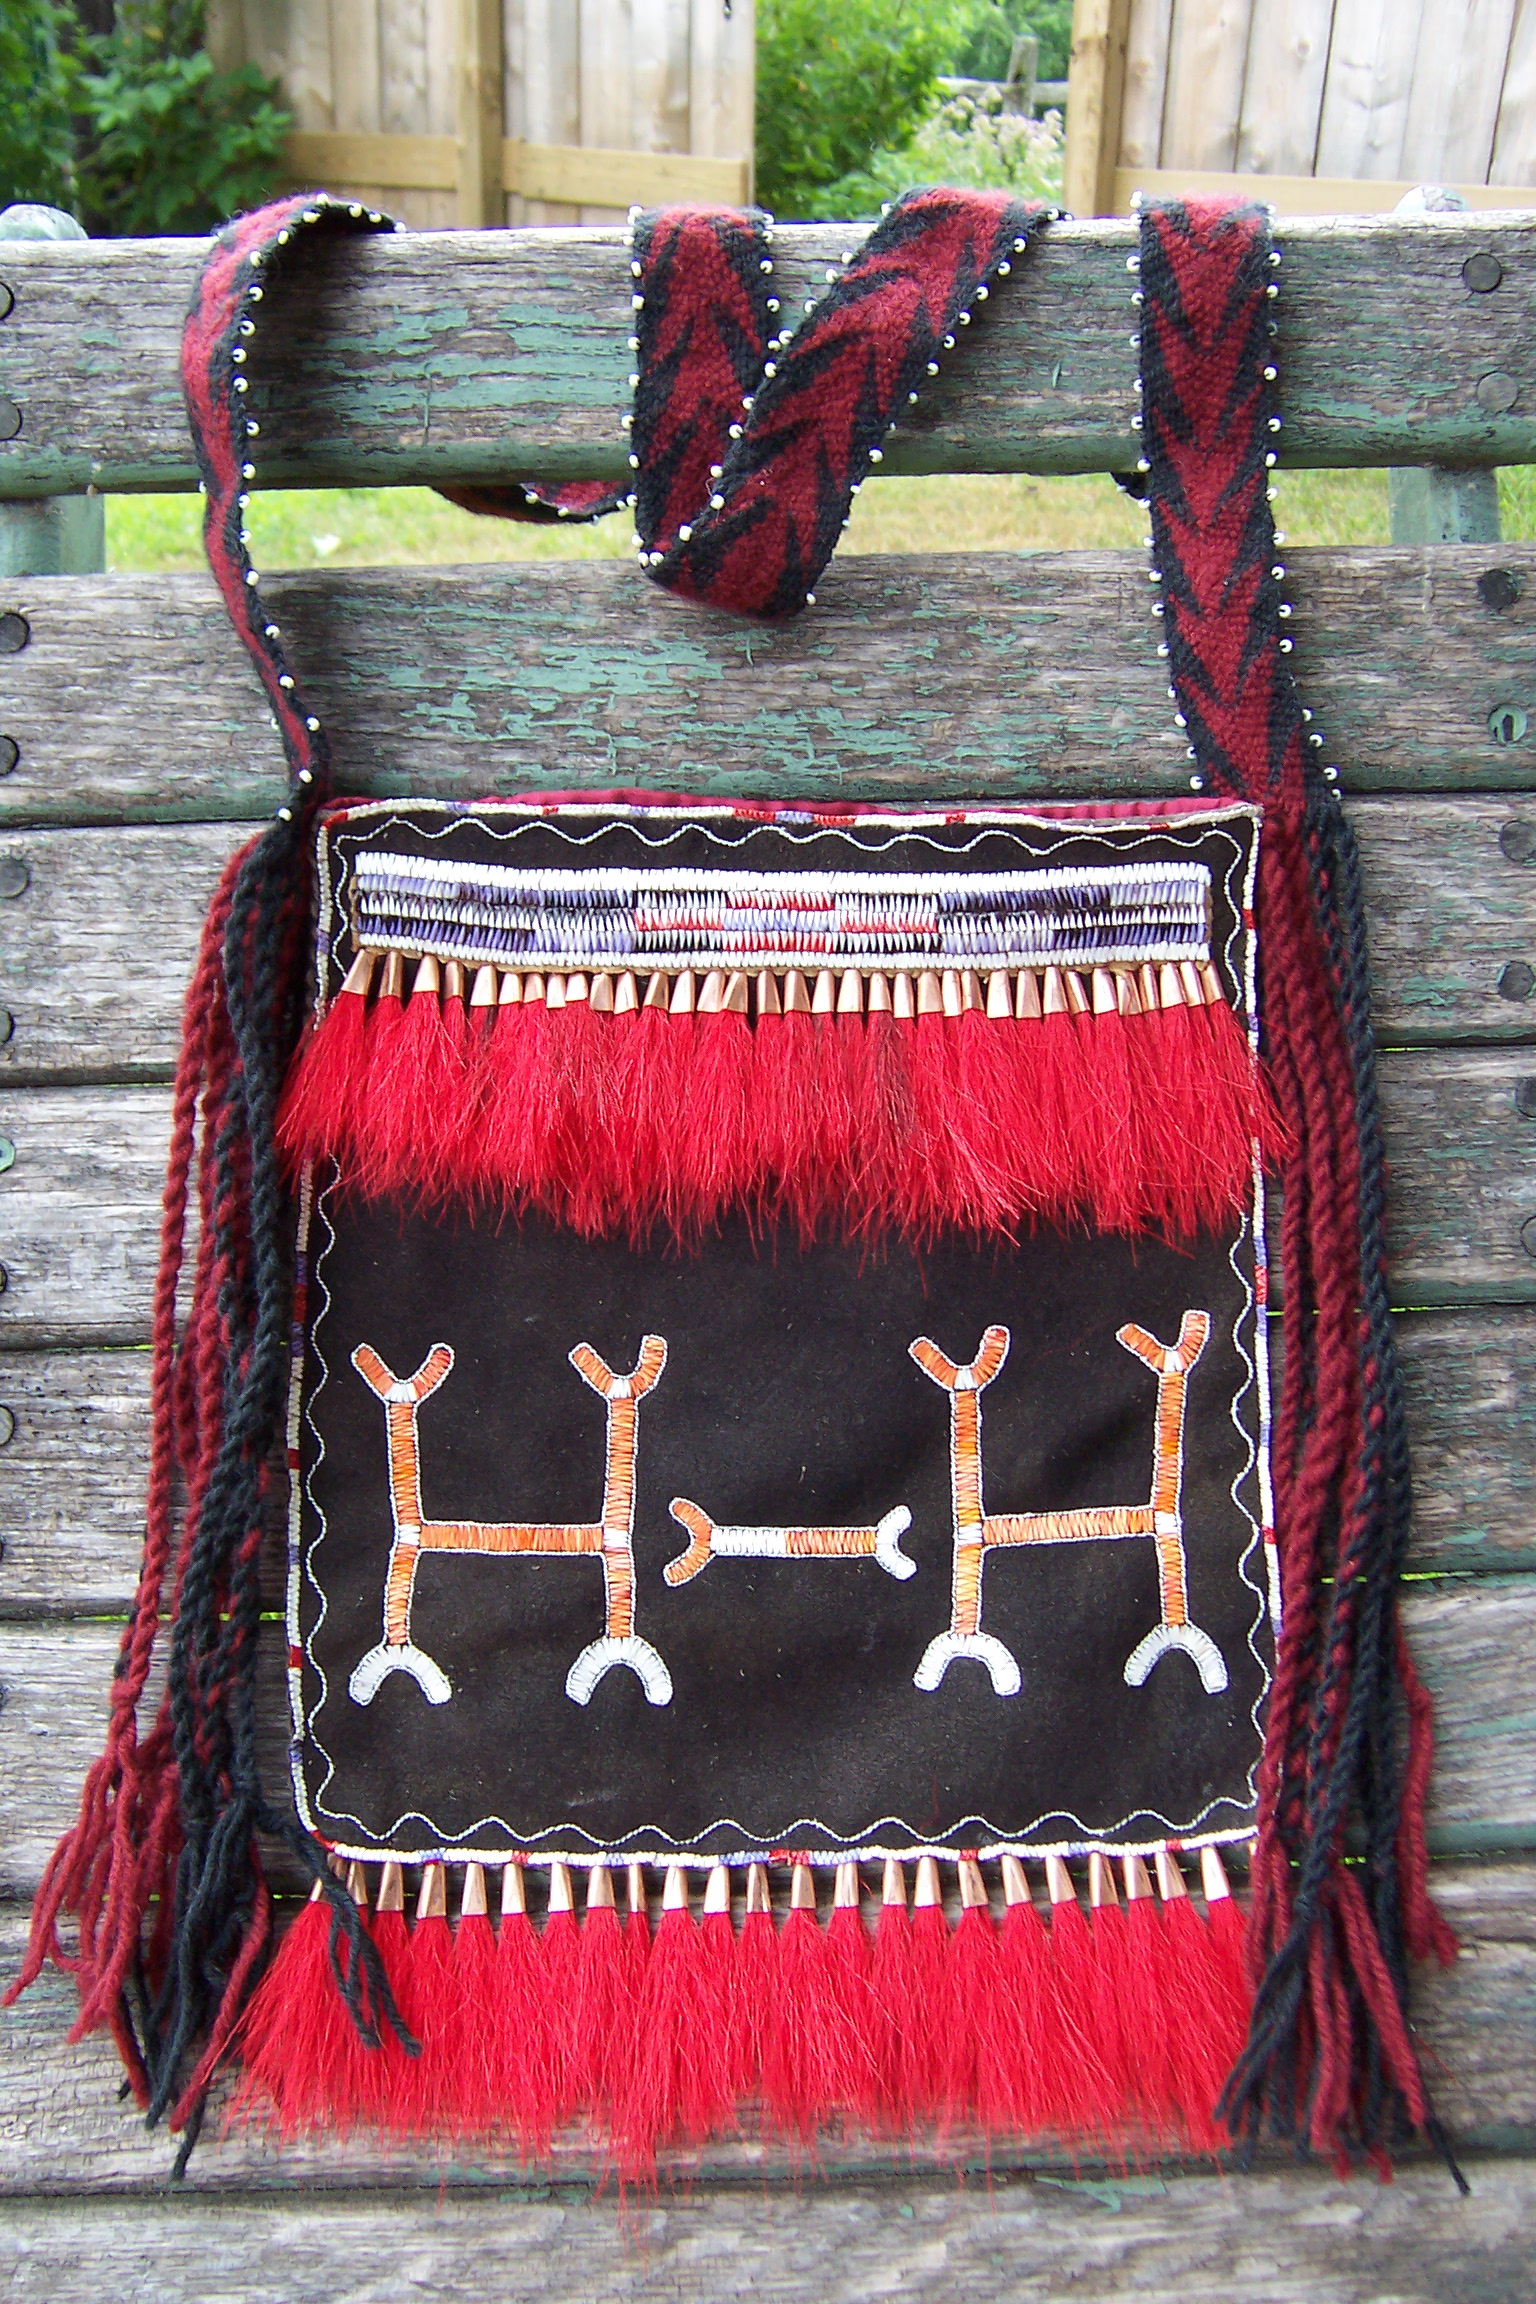 Delaware-style bag made by Rose Hartwell.